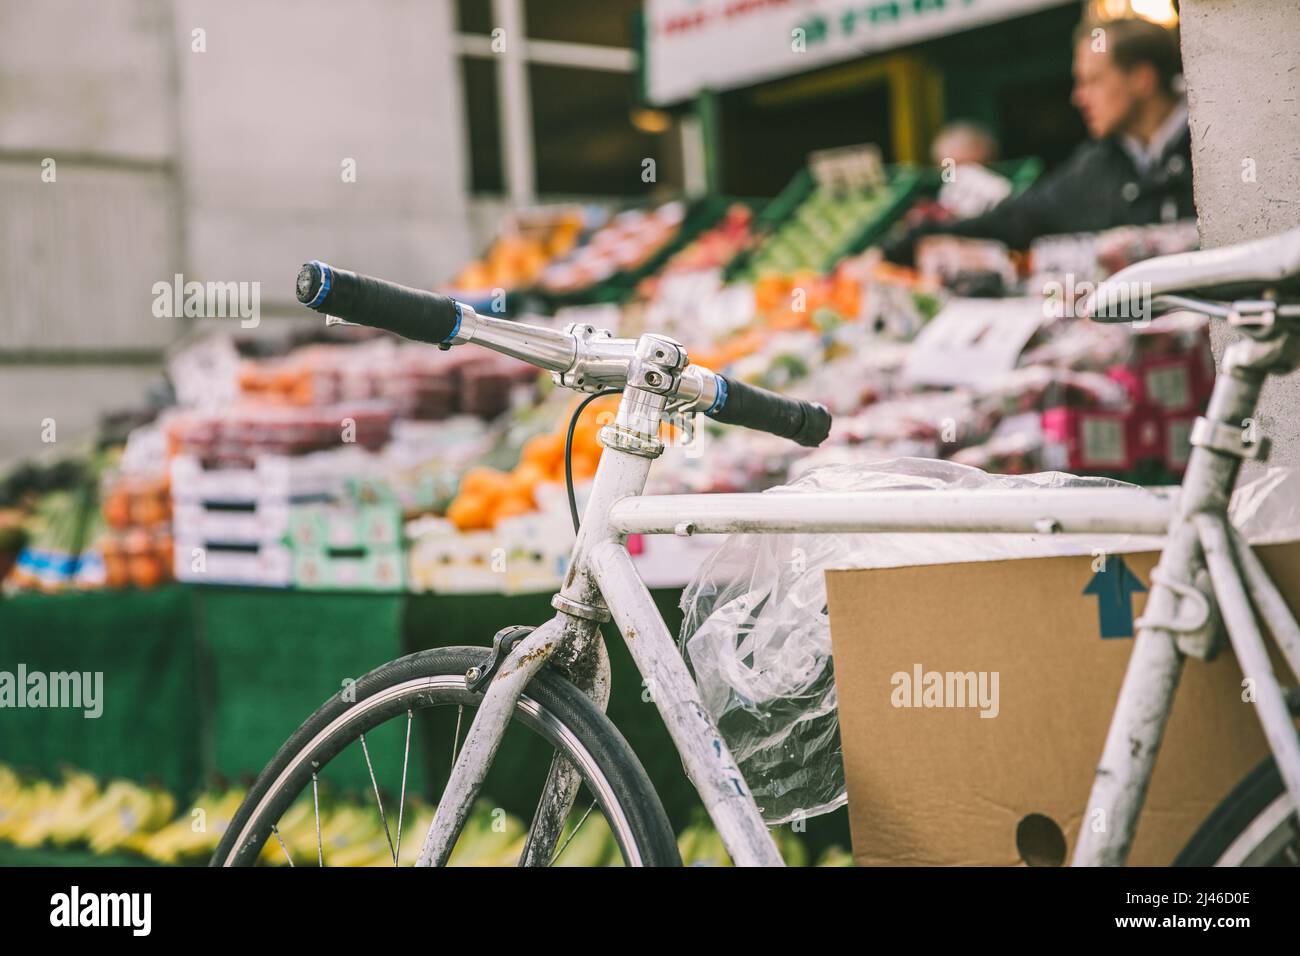 Greater London, London, UK - April 12, 2016: A bicycle can be seen in the foreground of this image, with a fruit and vegetable stall in the background Stock Photo